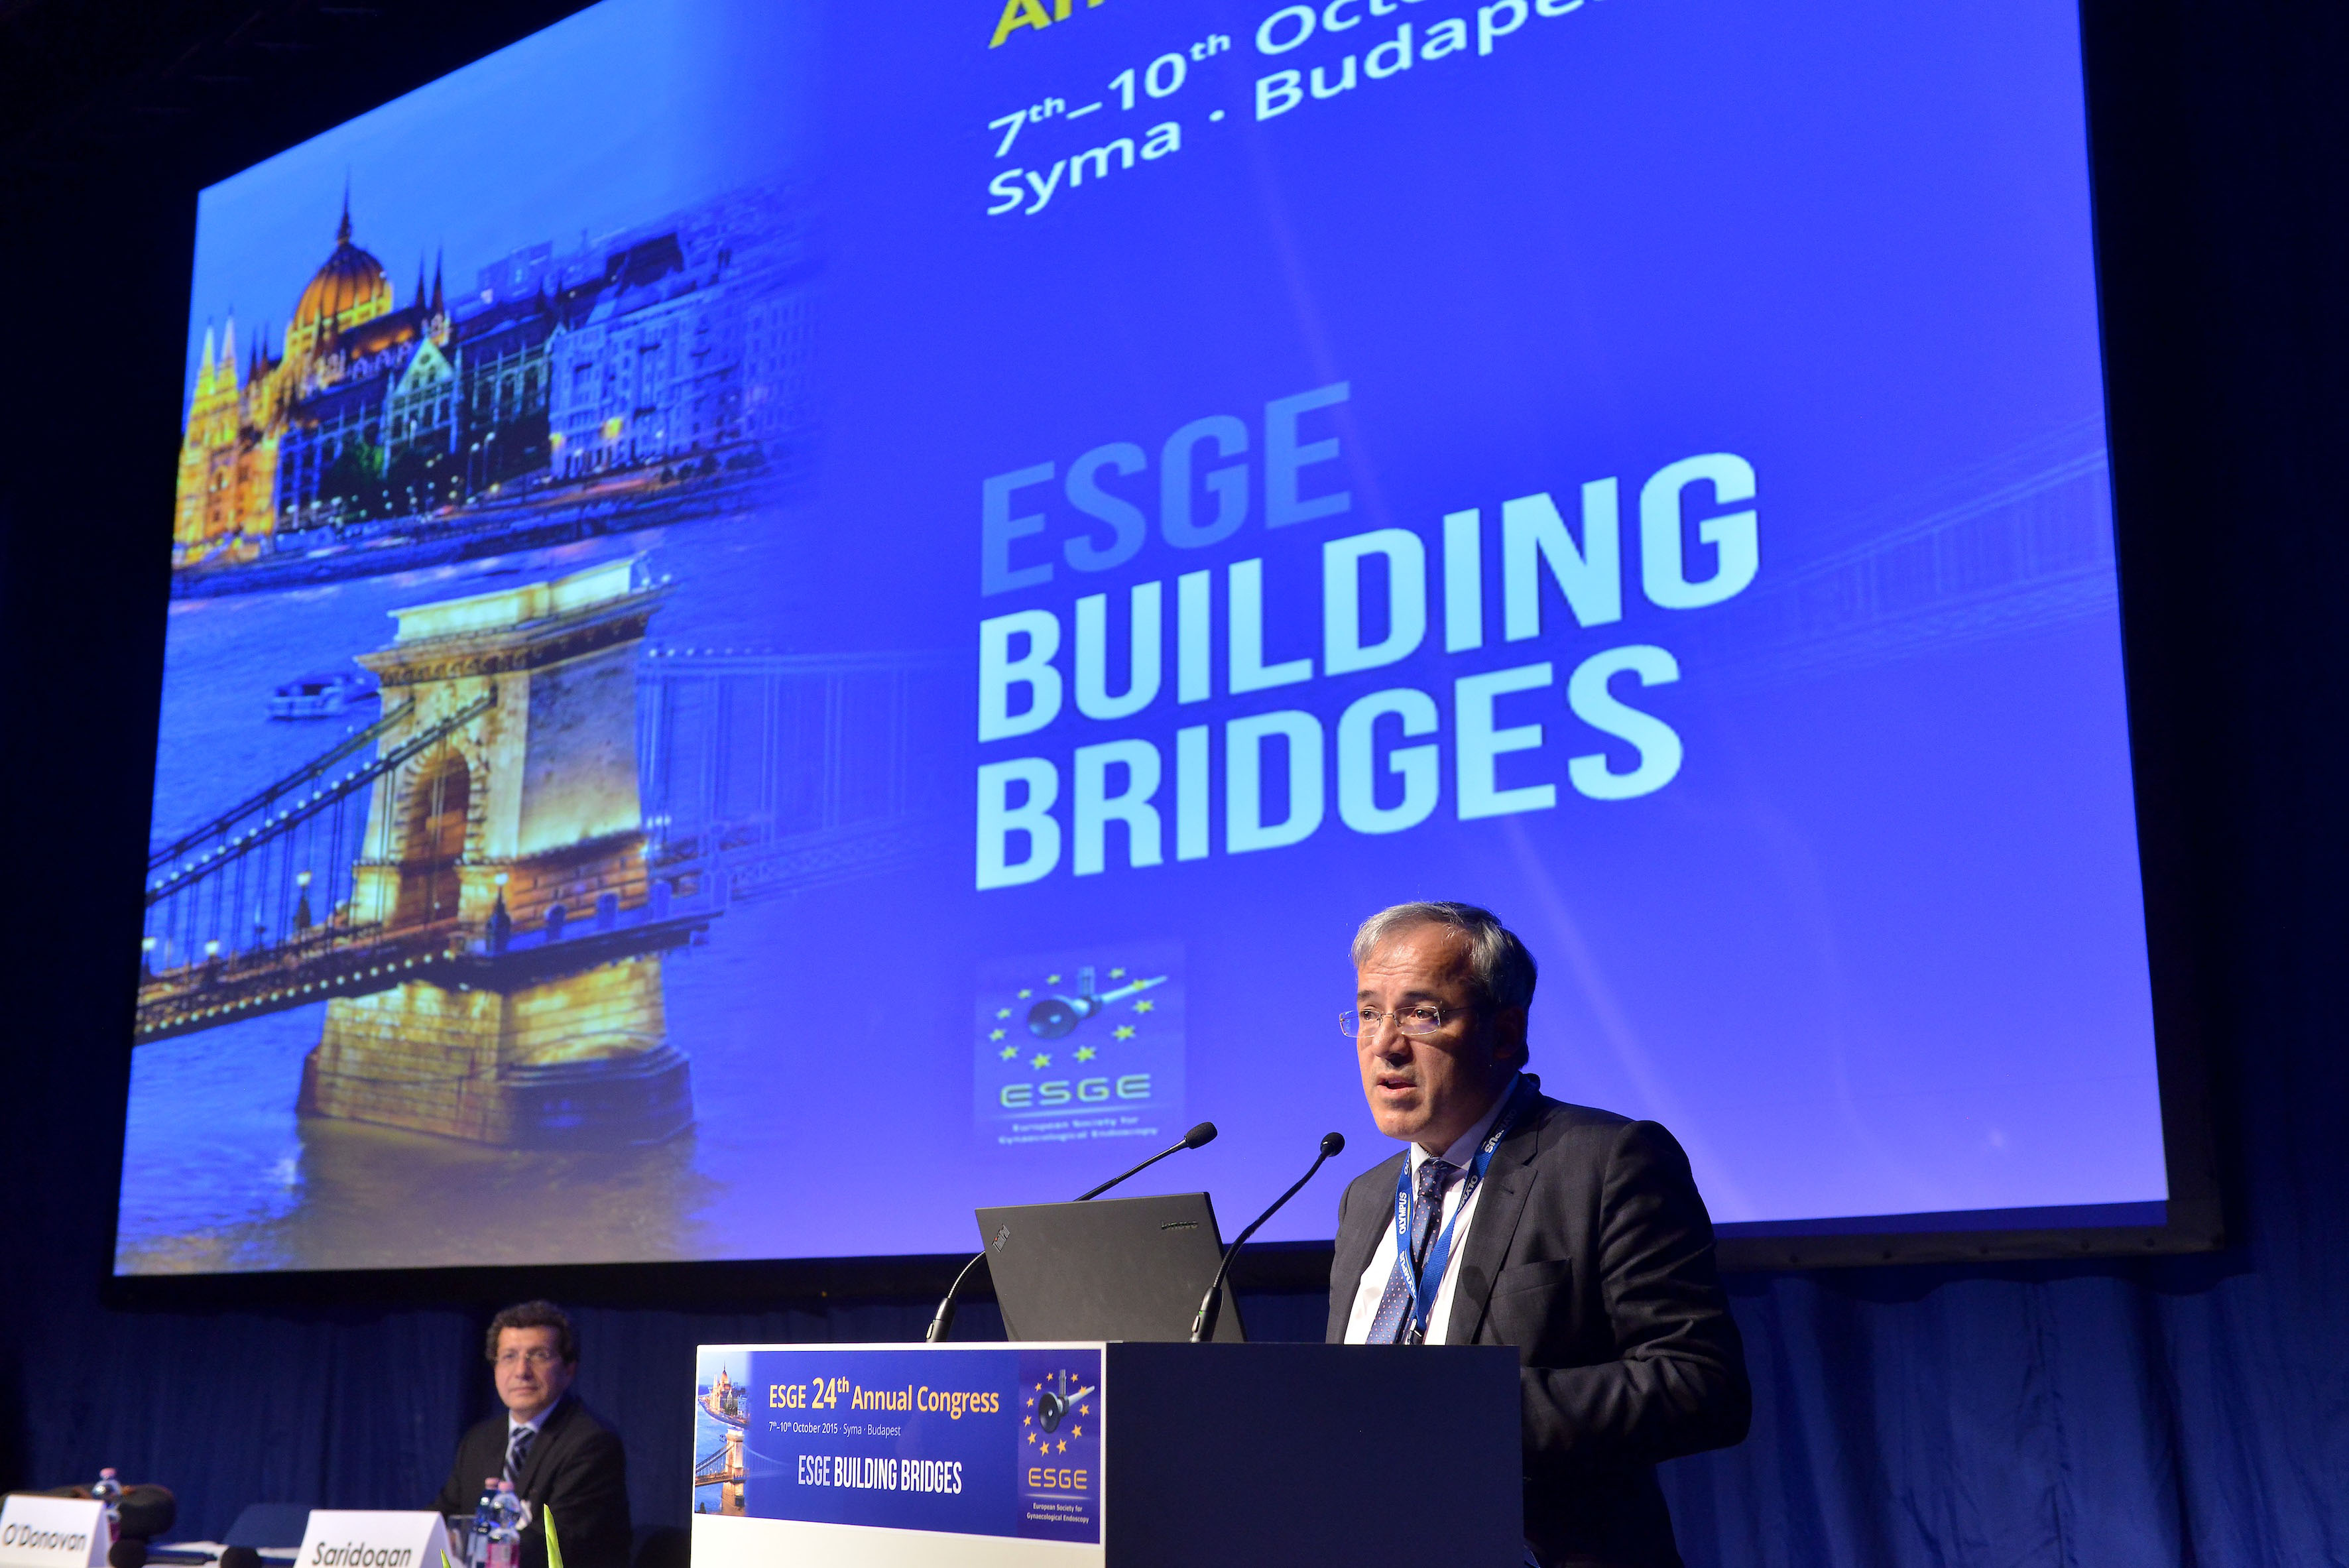 Budapest lectures / ESGE congress 2015